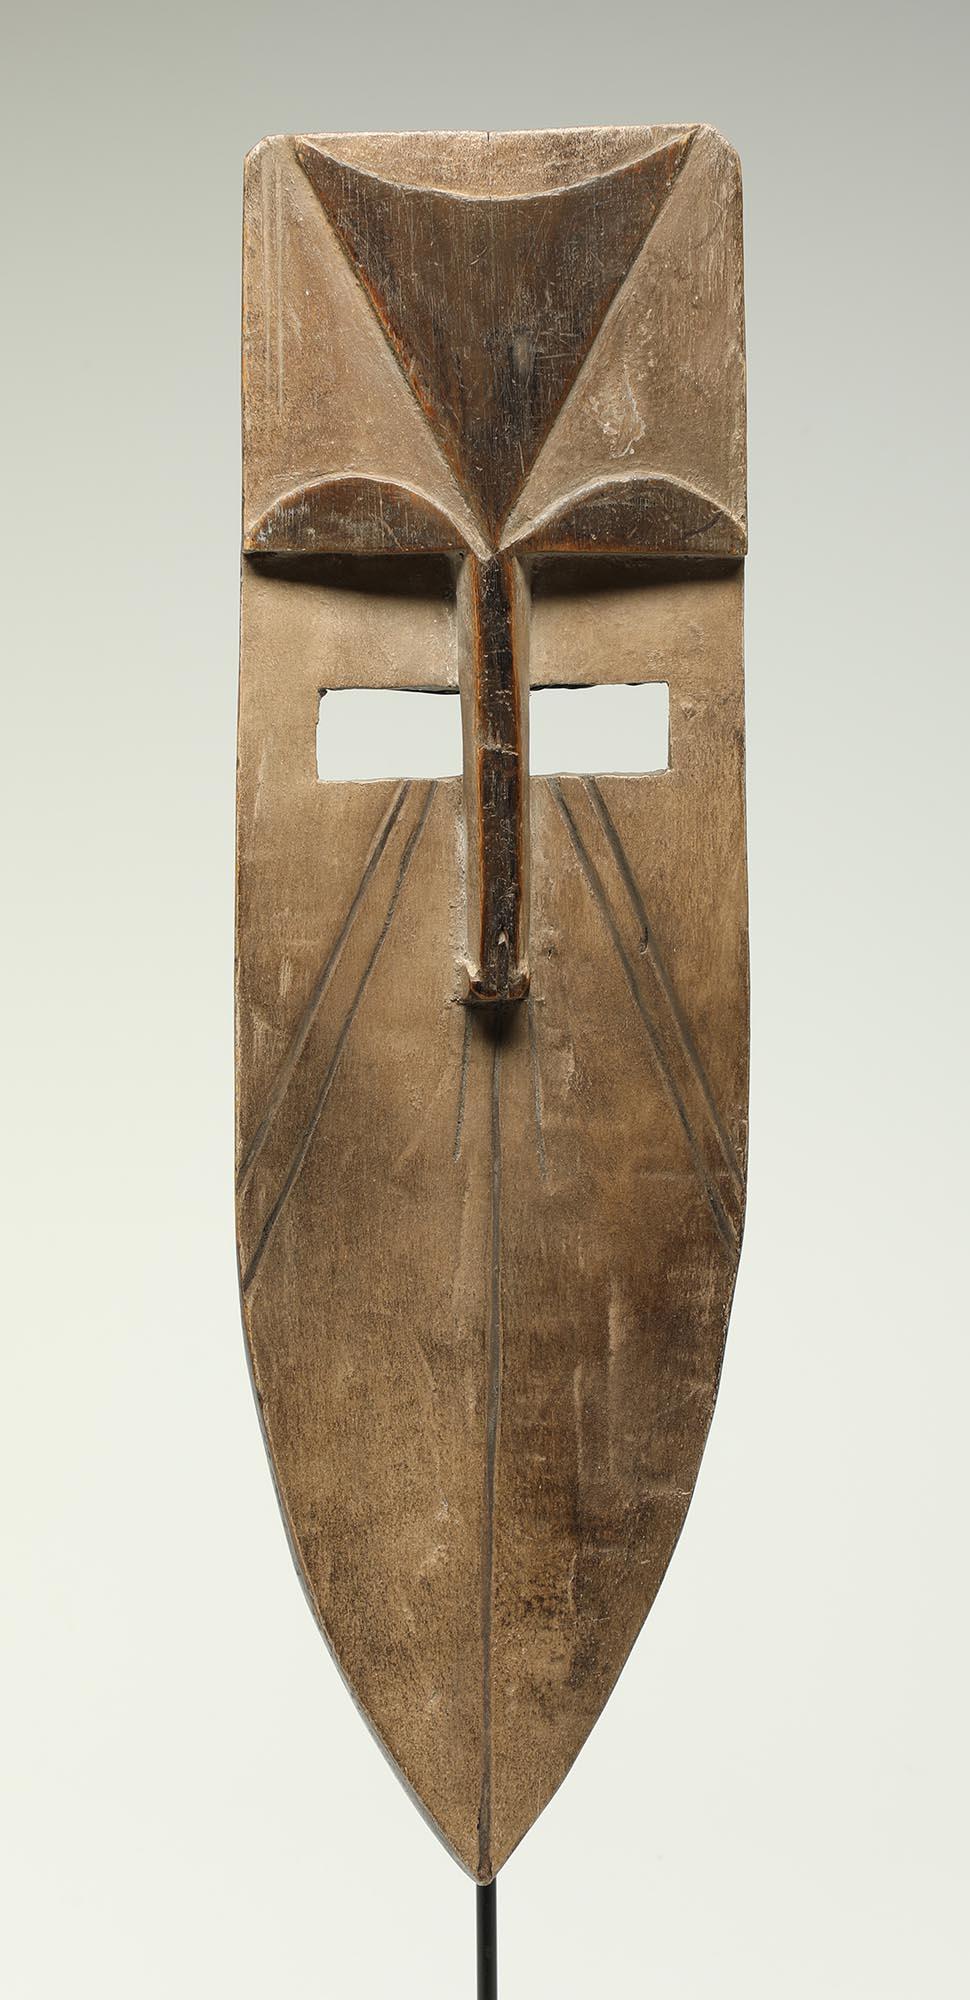 Early finely carved African Afikpo mask with stylized geometric long face.
From Nigeria close to the Cross River.
From an old collection in the Southwest.
Overall dimensions 15 x 4 1/2 x 1 3/4 inches. Including metal and wood stand 21 inches